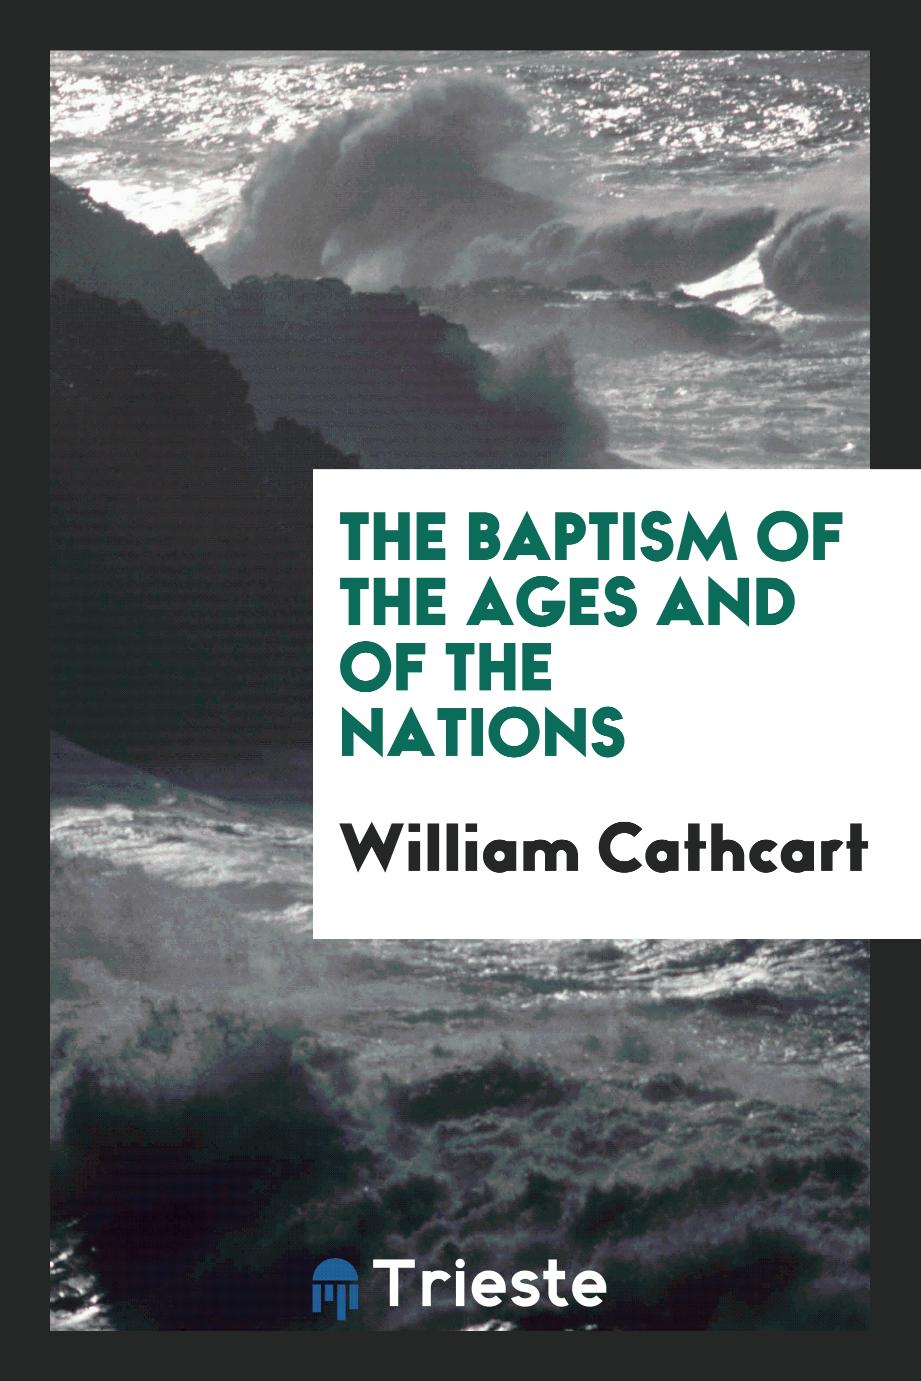 The baptism of the ages and of the nations